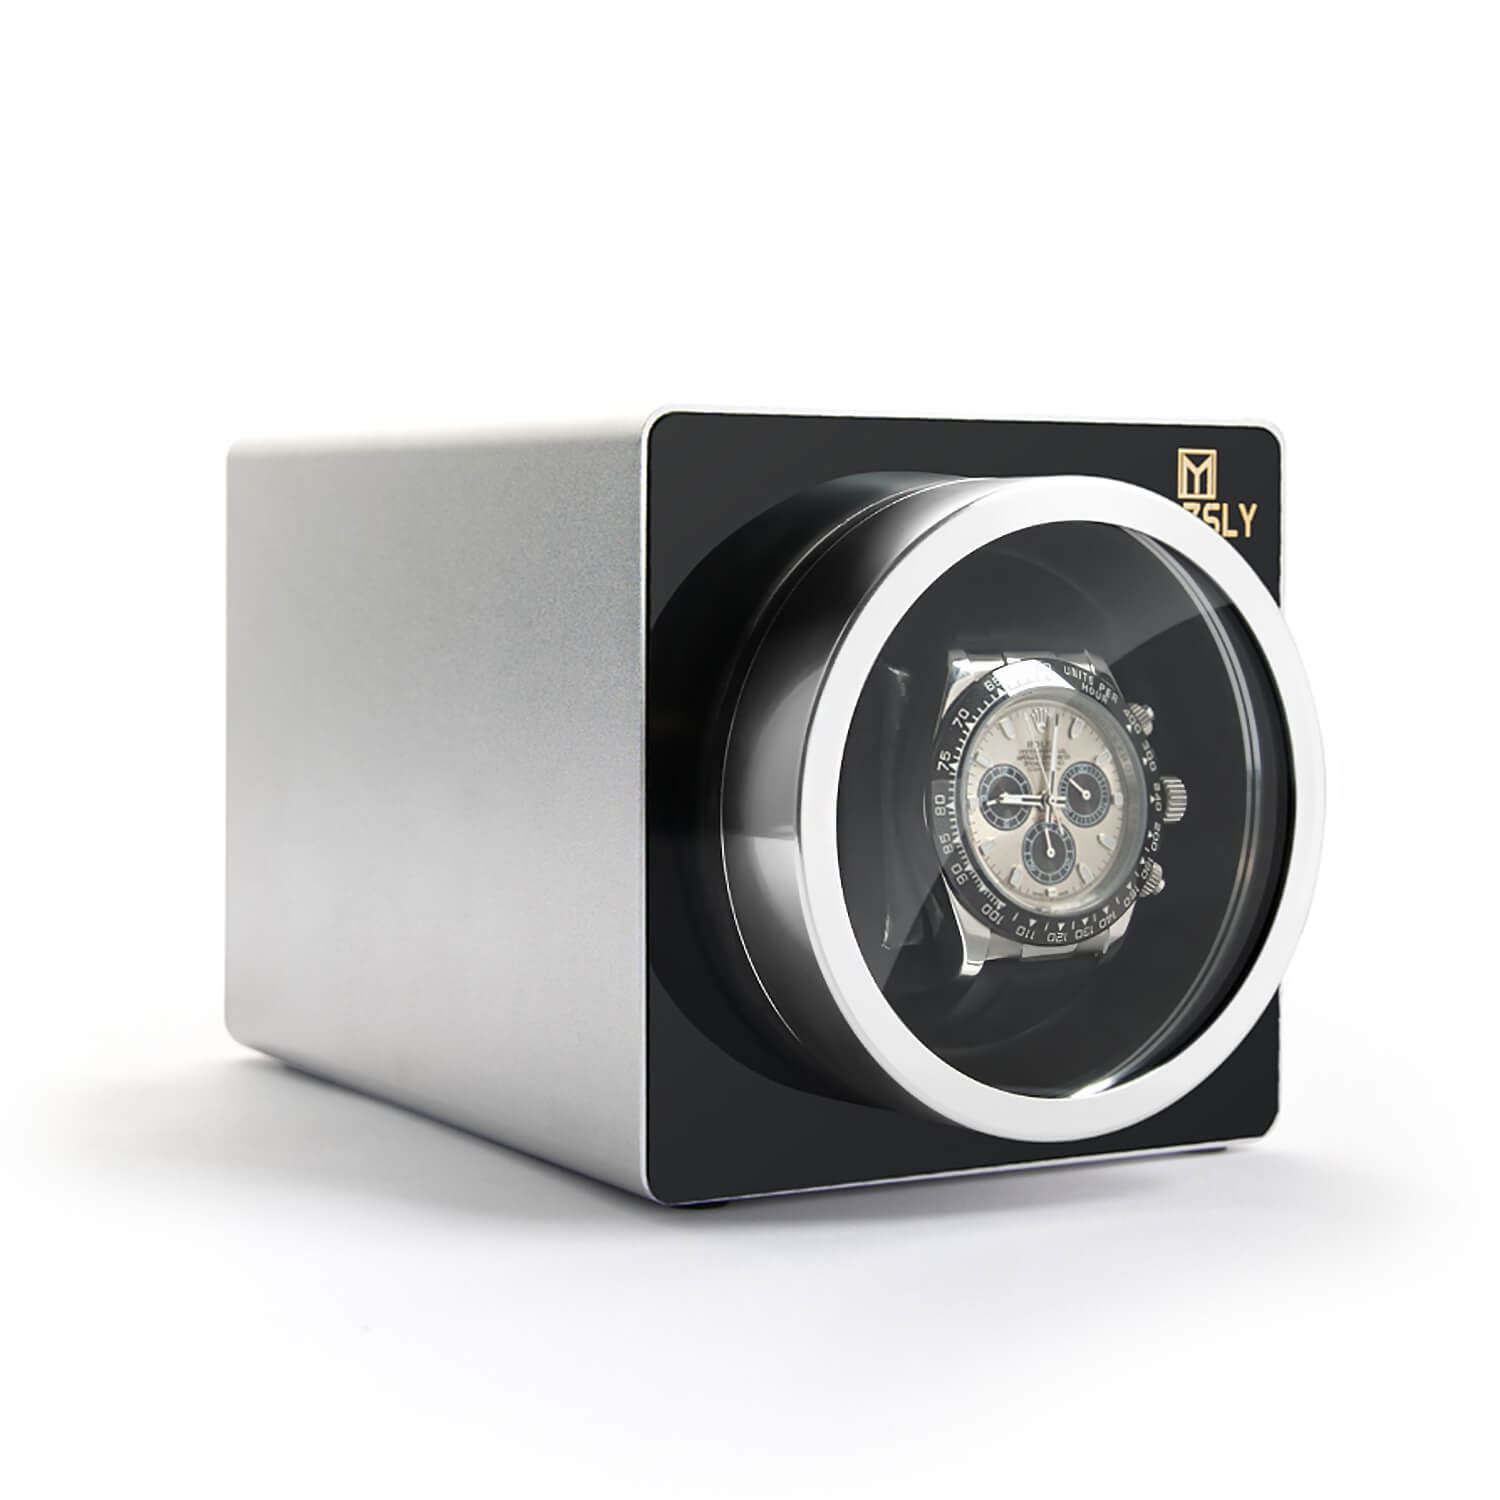 MOZSLY® Single Watch Winder - Space Metal Silver